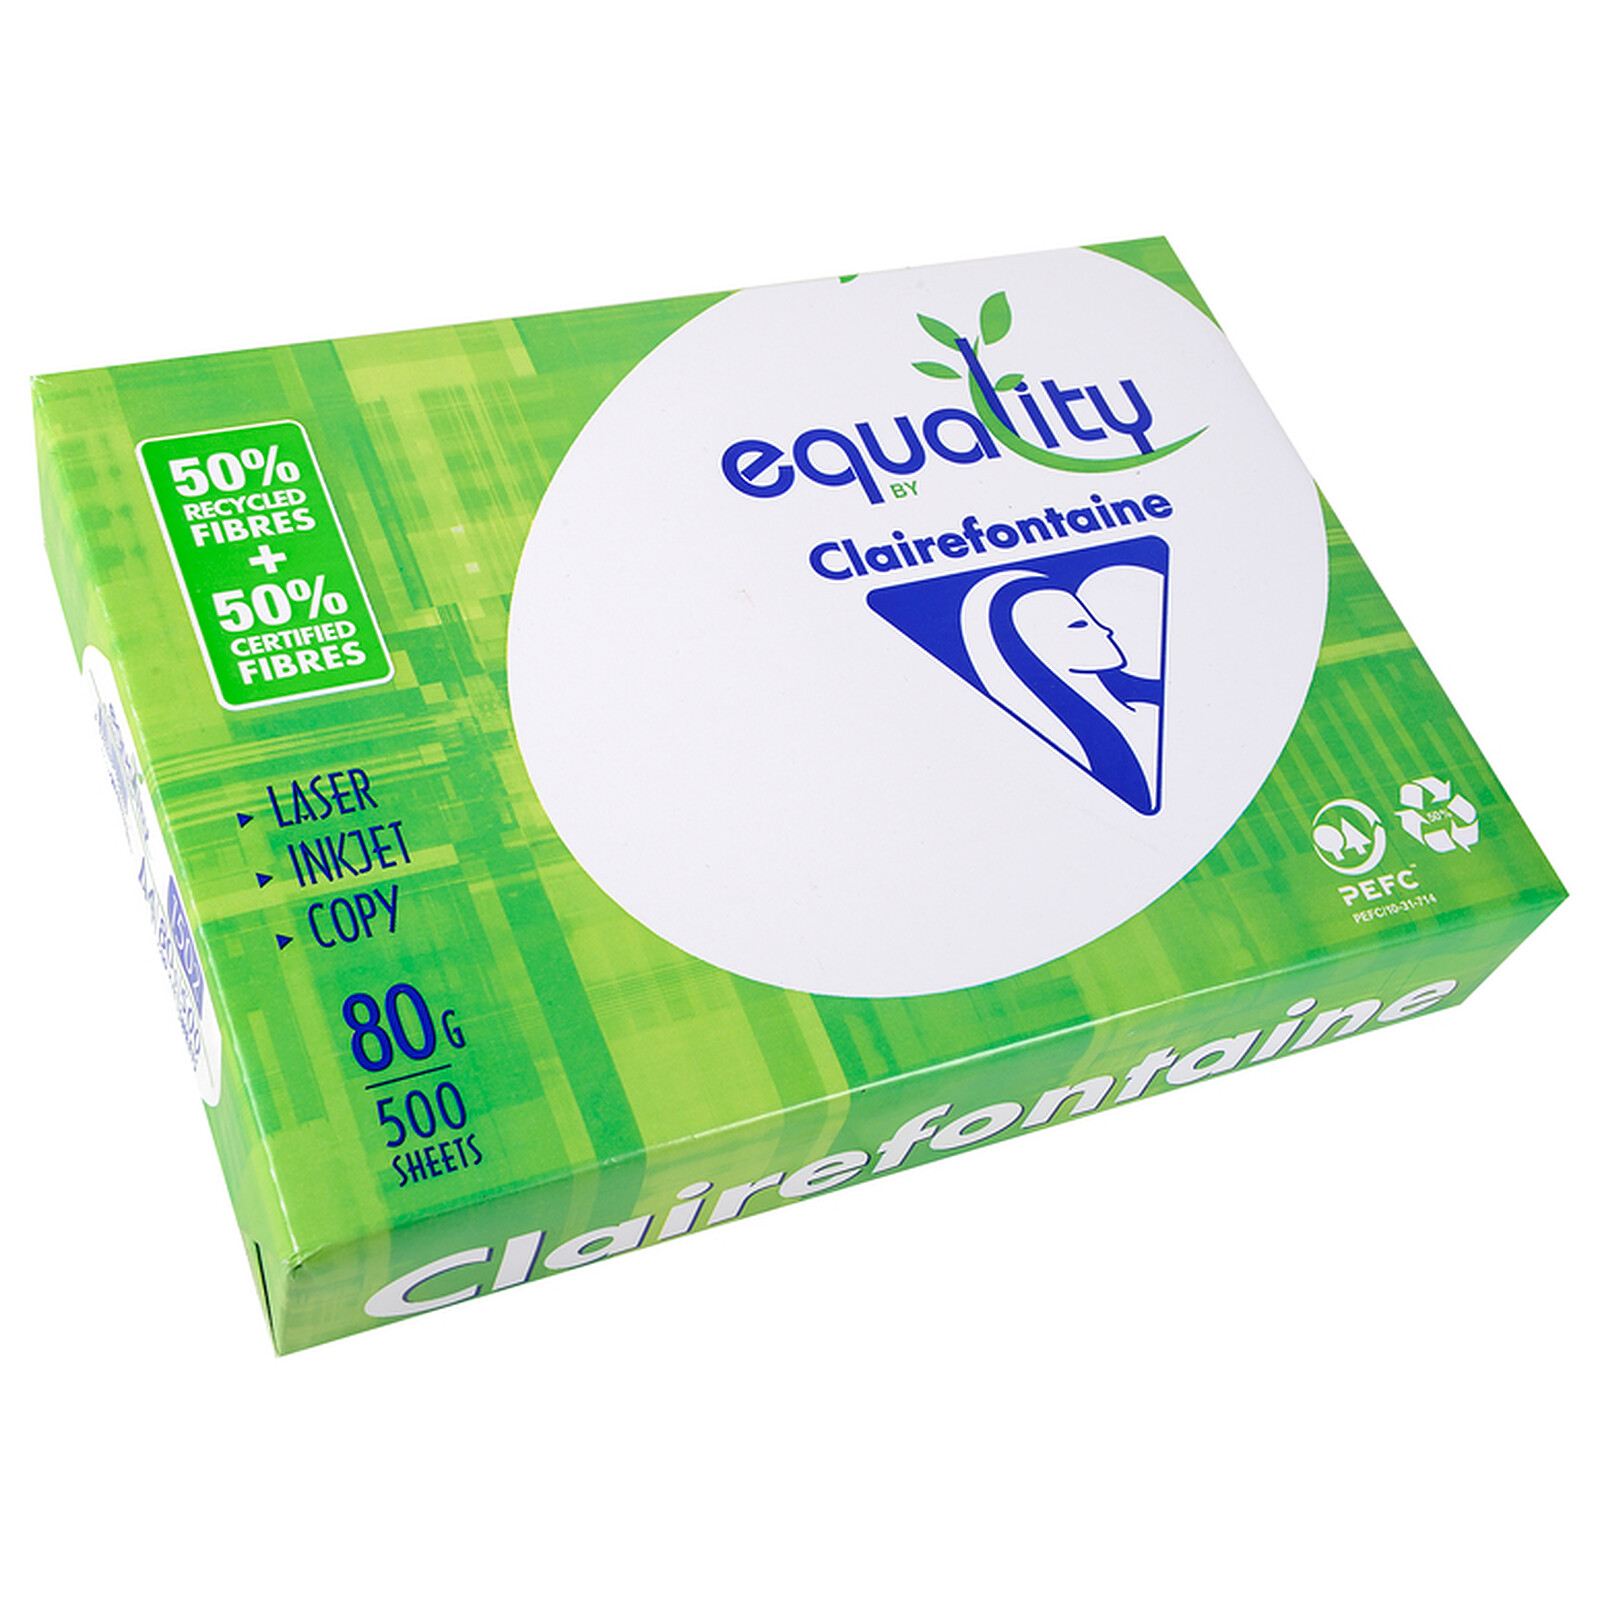 Ramette papier 50% recyclé A4 80g Equality CLAIREFONTAINE